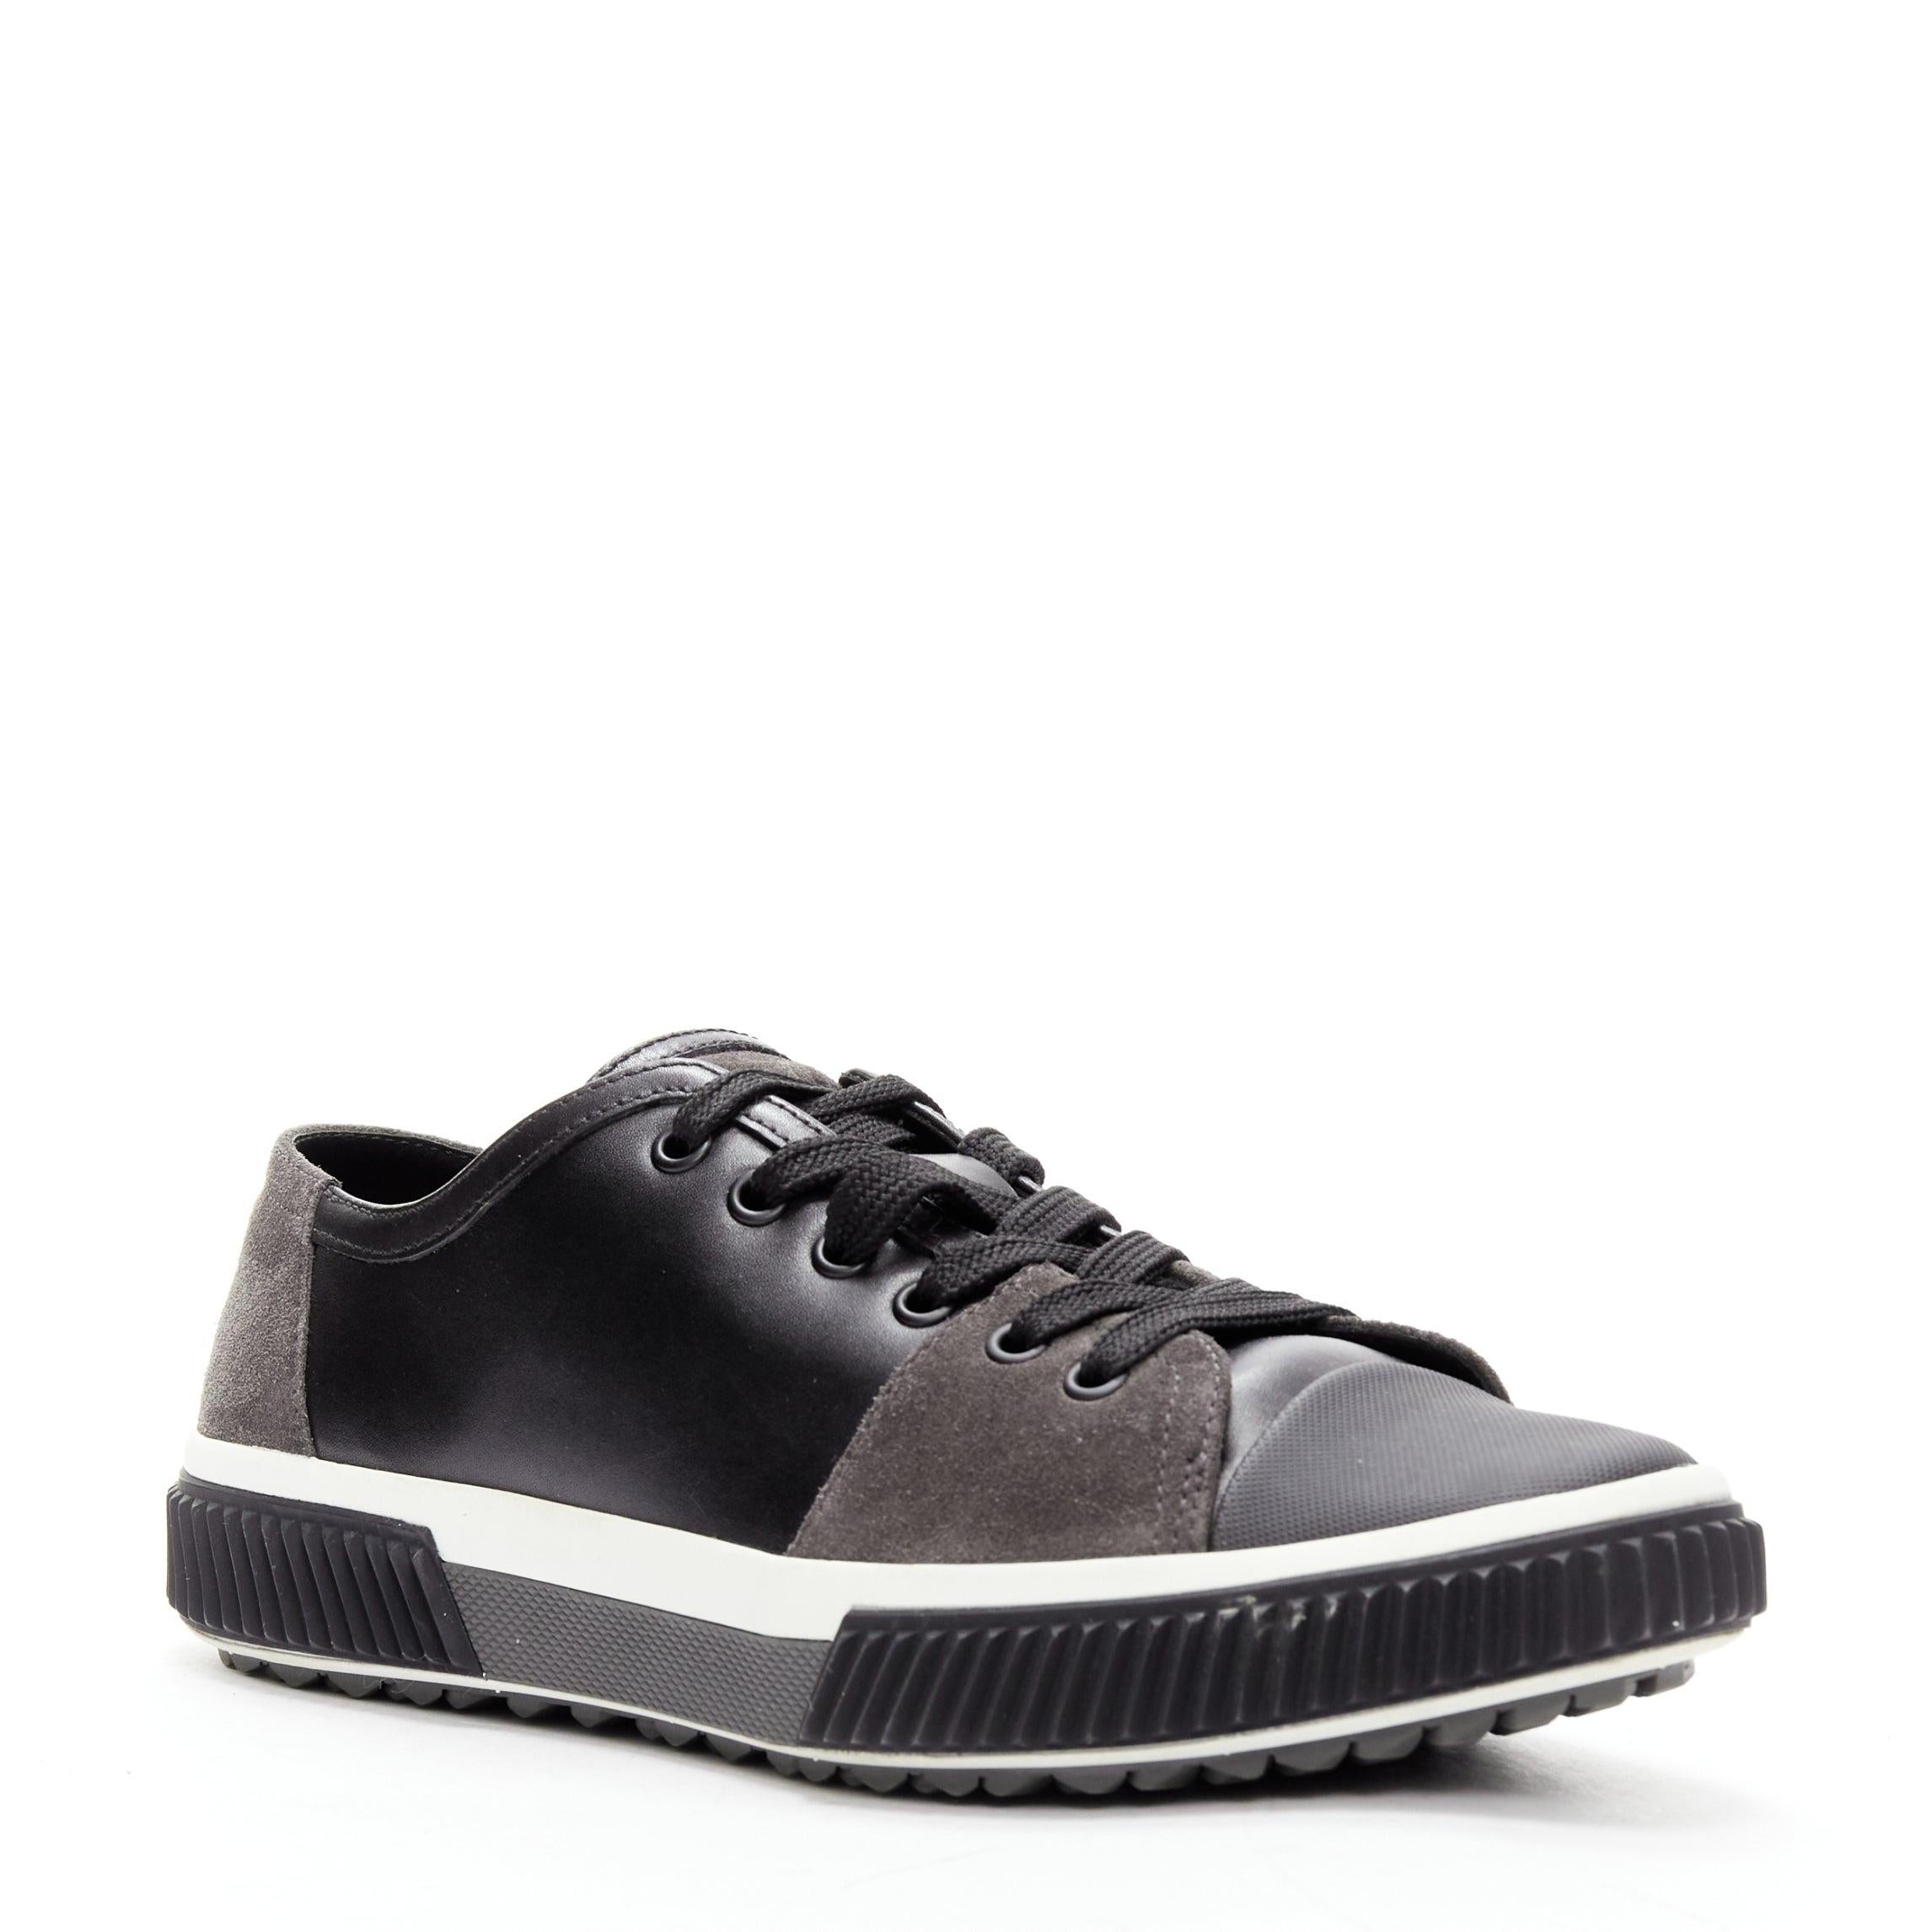 PRADA Stratus black grey suede leather low top sneakers UK5.5 EU39.5
Reference: CNLE/A00226
Brand: Prada
Model: Stratus
Material: Leather, Canvas
Color: Black, Grey
Pattern: Solid
Closure: Lace Up
Lining: Black Leather
Extra Details: MODEL: